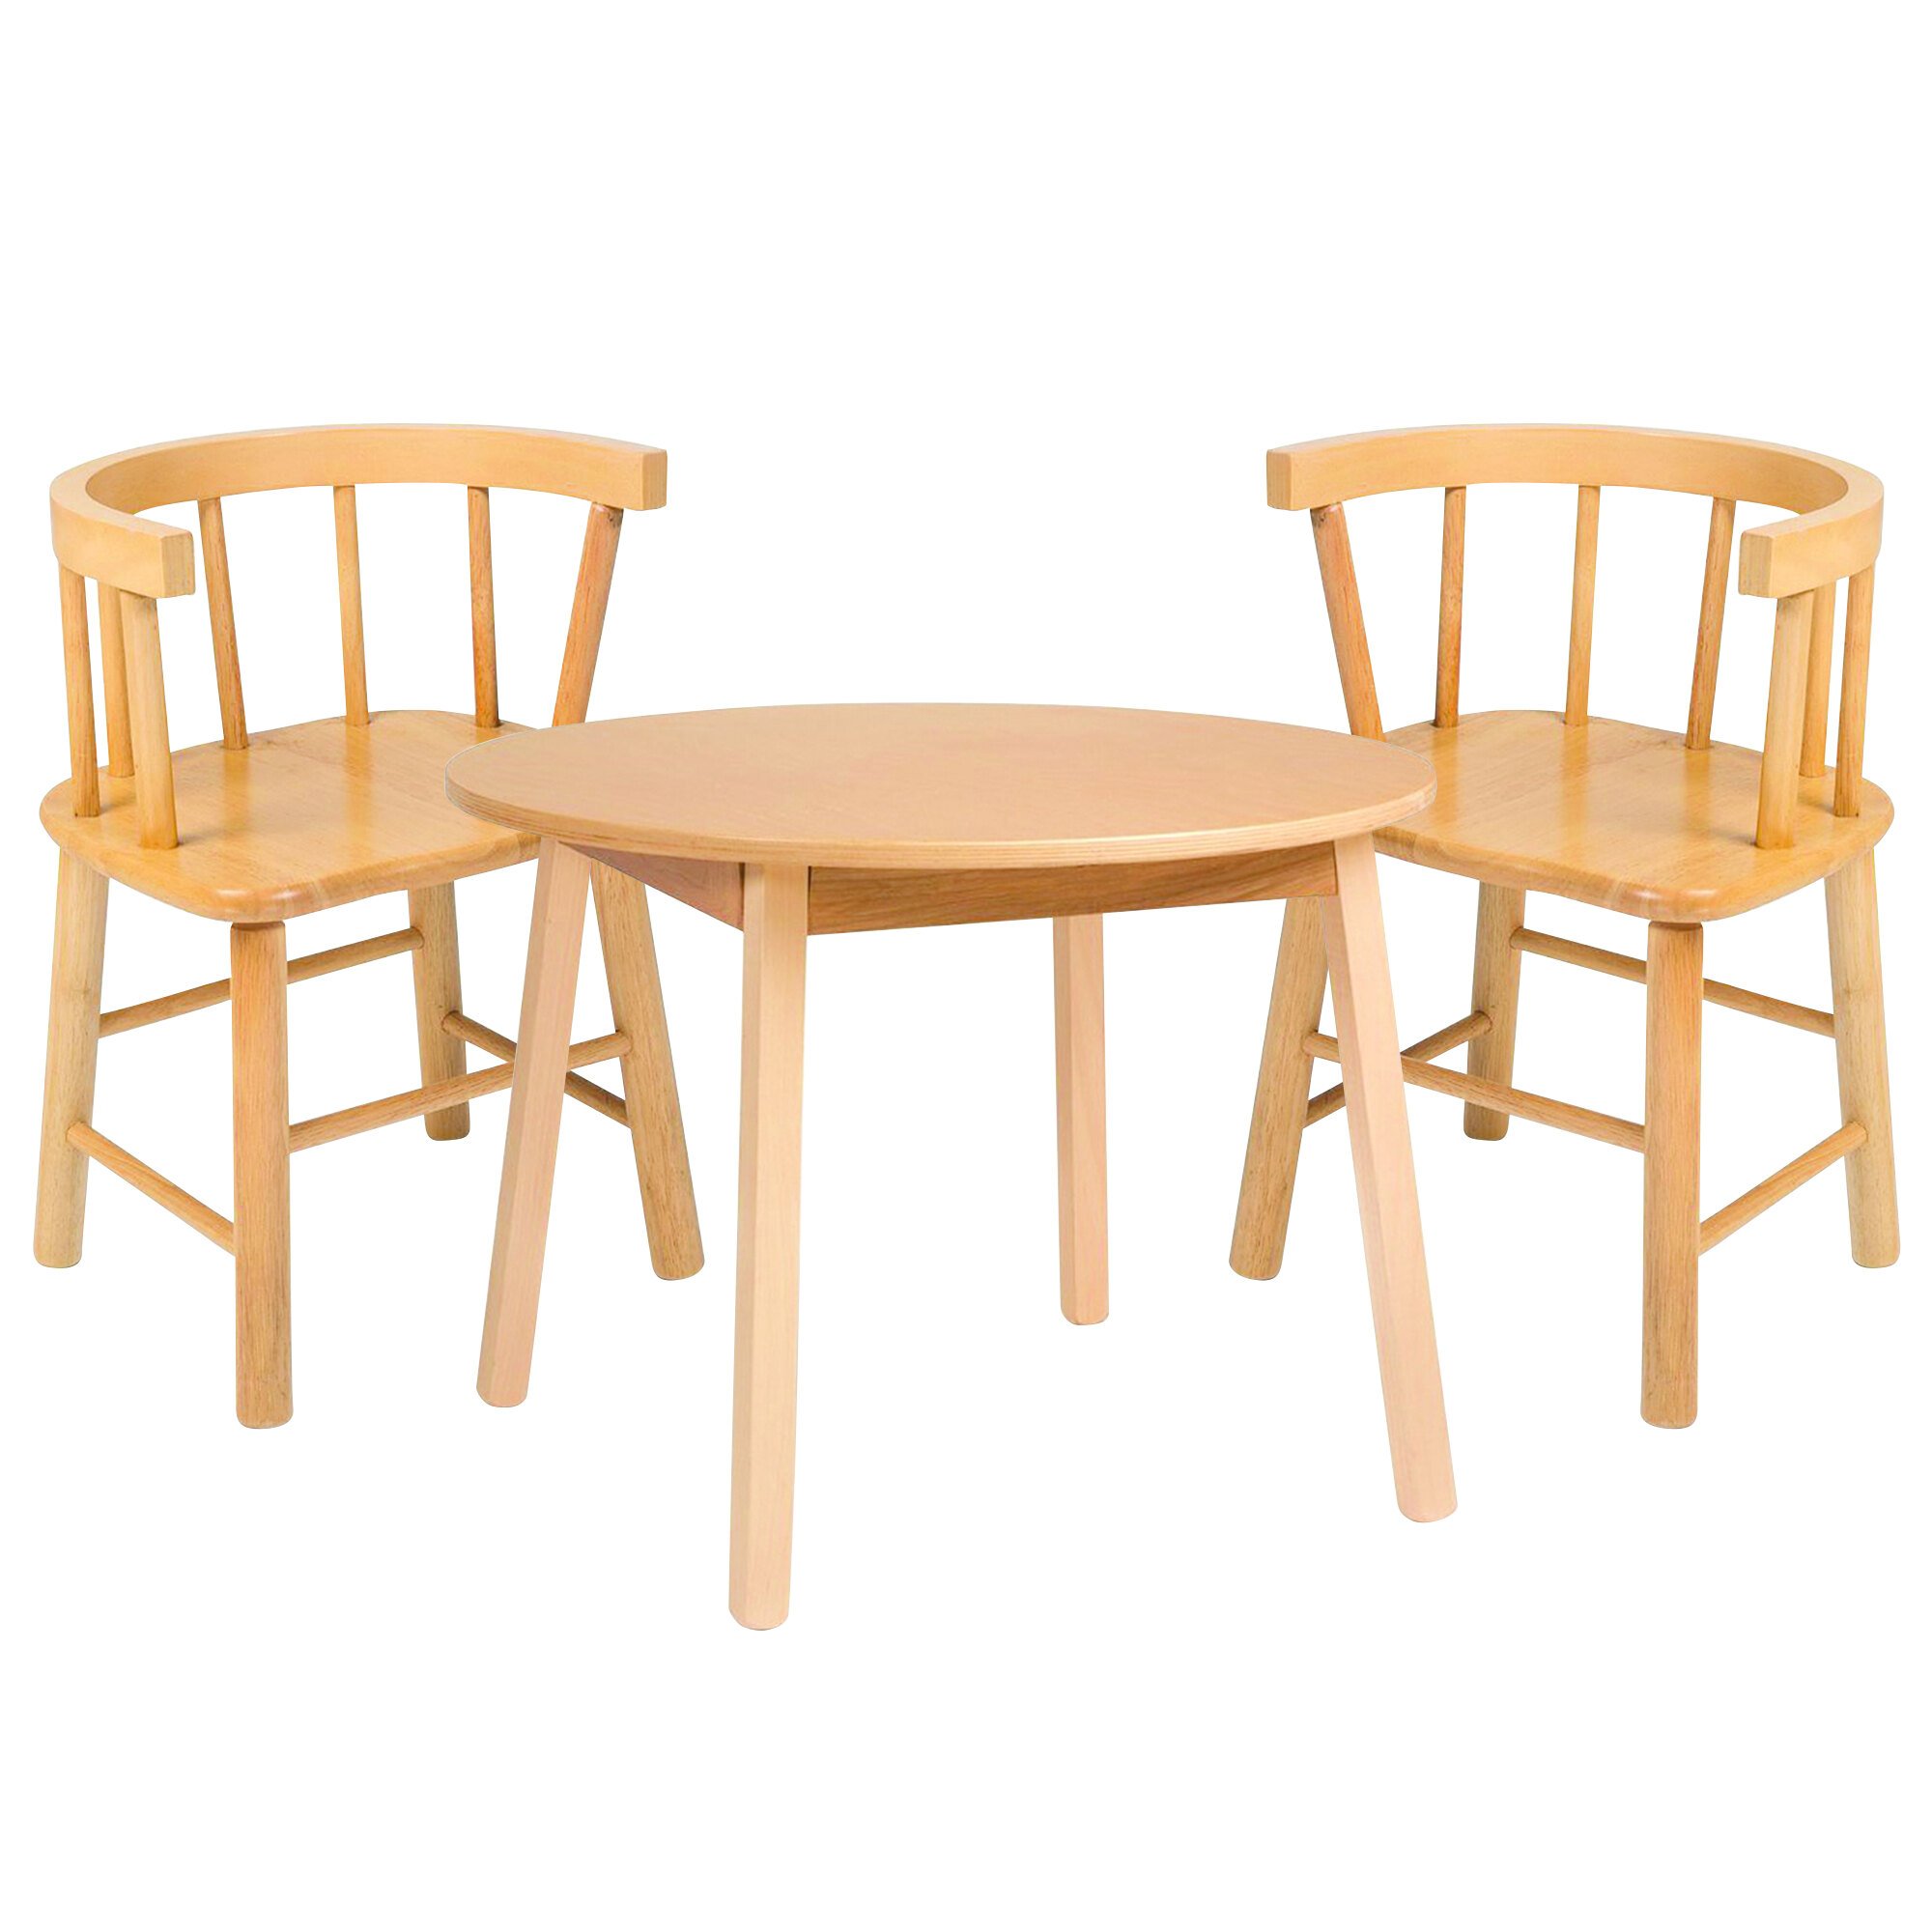 Whitney Brothers WB0180 28" Round 21" High Wood Children's Table with 2